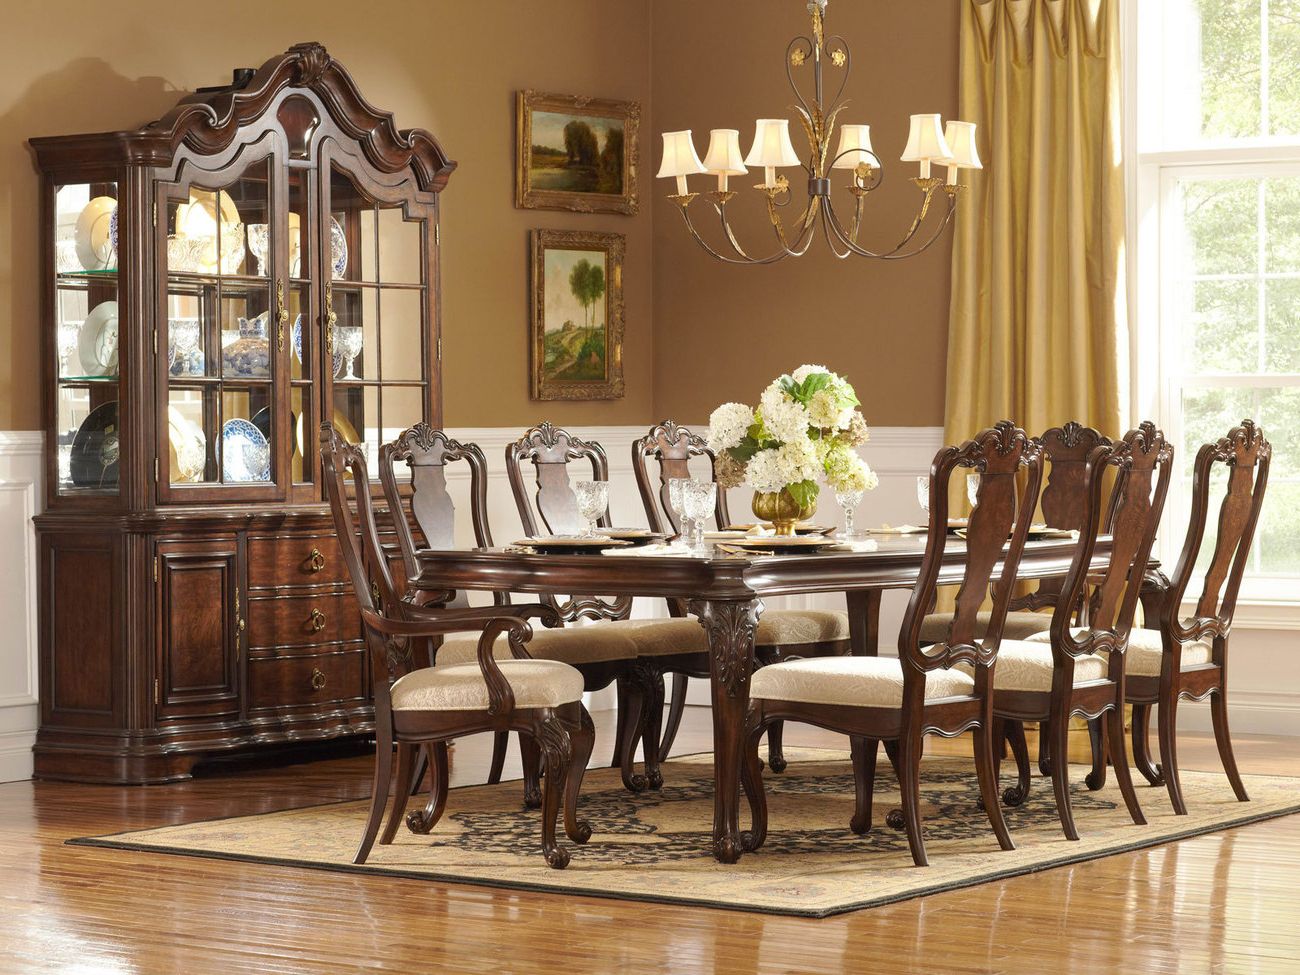 Medium Elegant Dining Tables With Most Popular How To Choose Elegant Dining Room Furniture Sets (View 7 of 25)